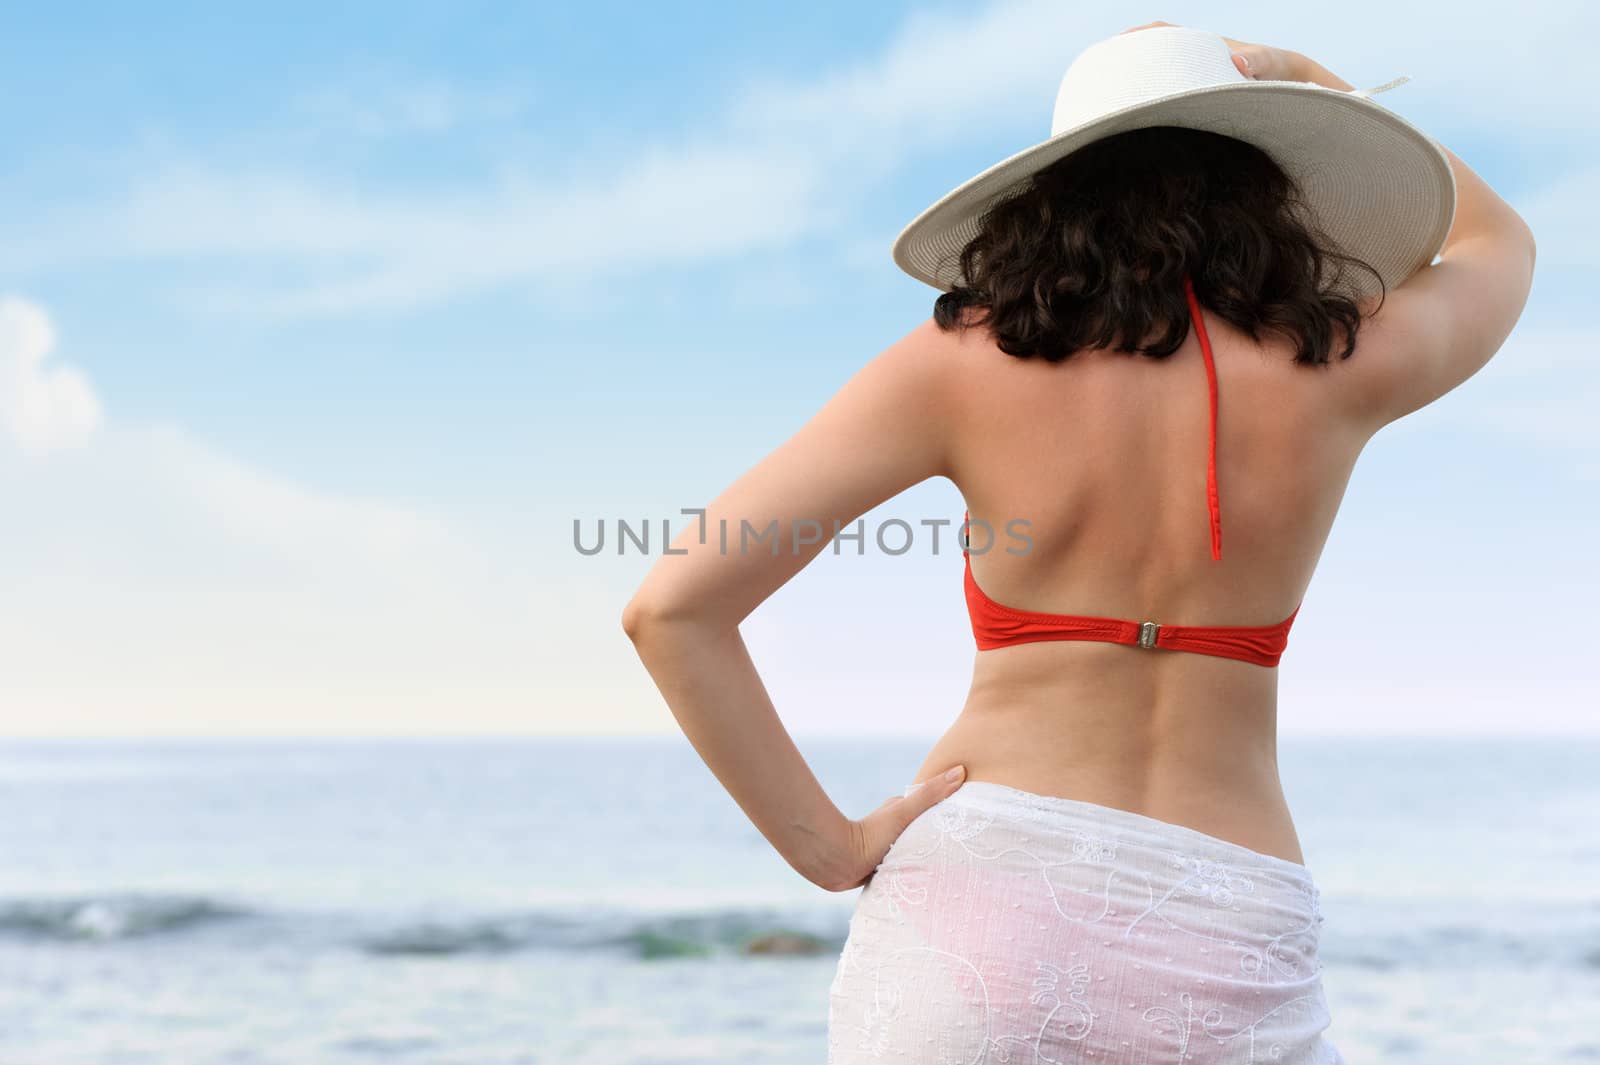 The woman on sea coast in a hat. The rear view